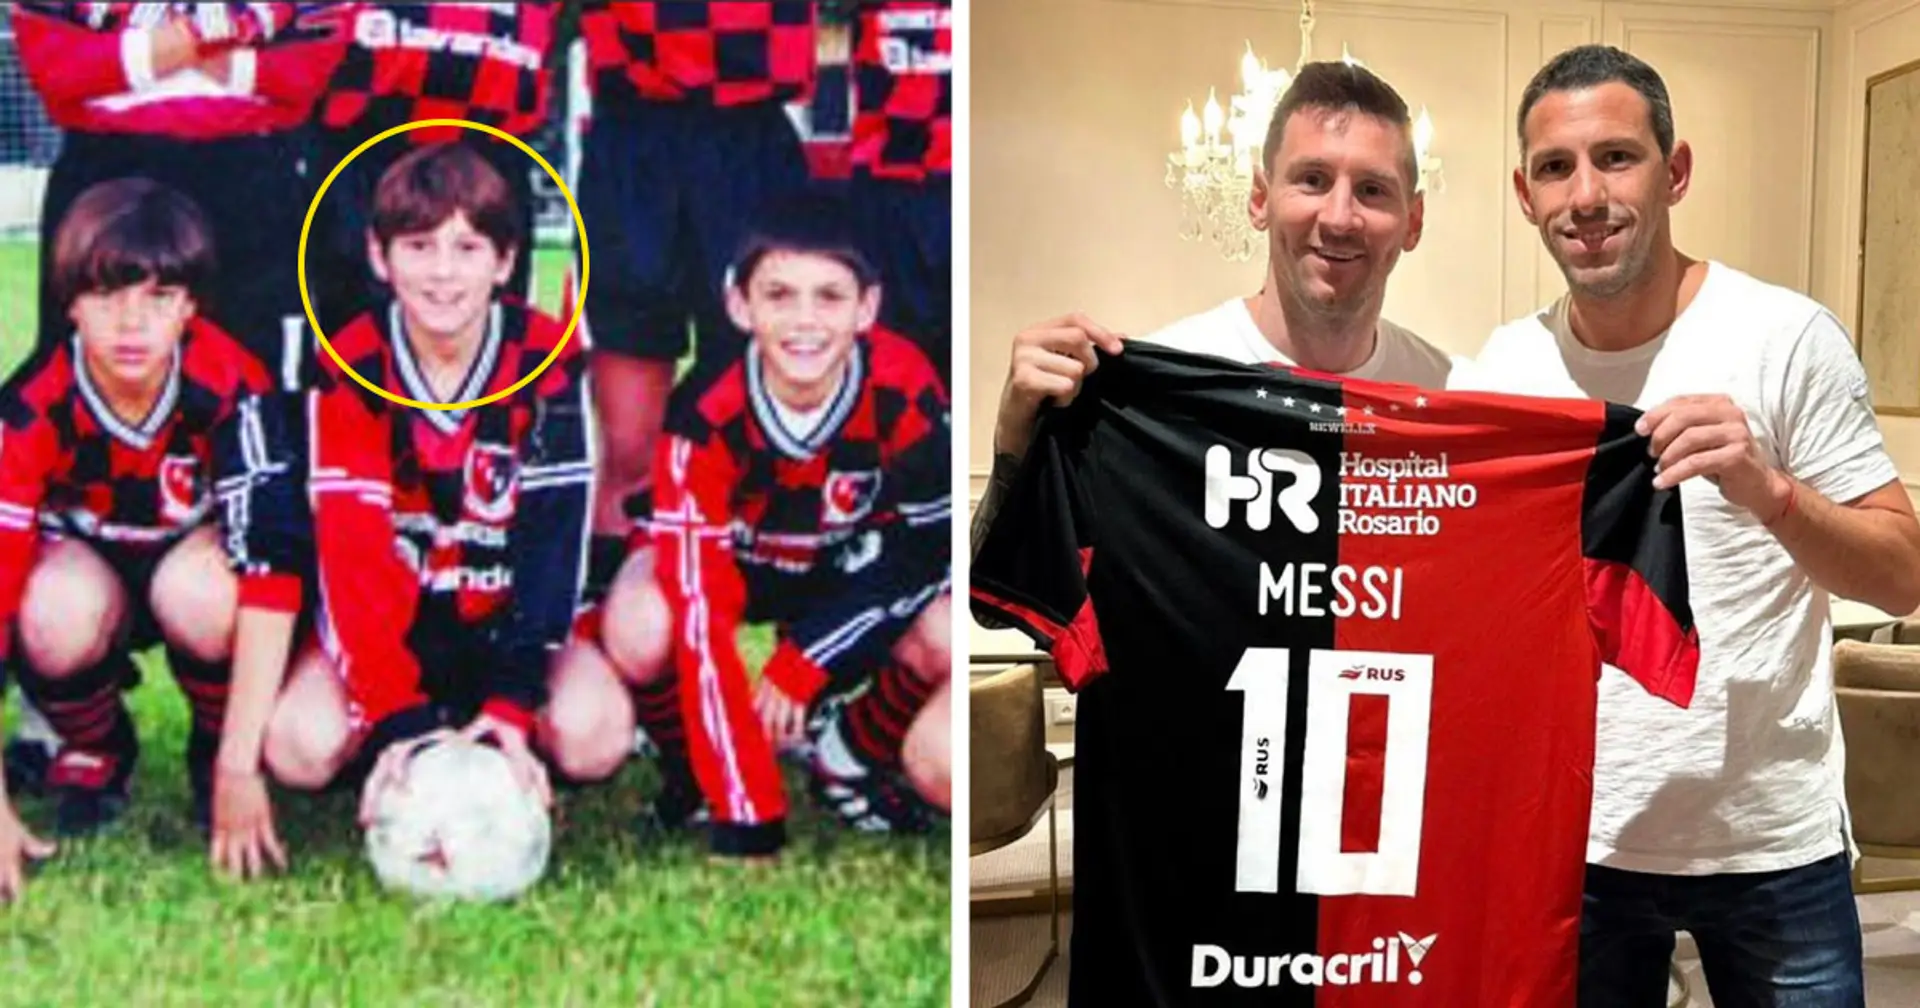 Messi's homecoming: Inter Miami's emotional encounter with Newell's Old Boys